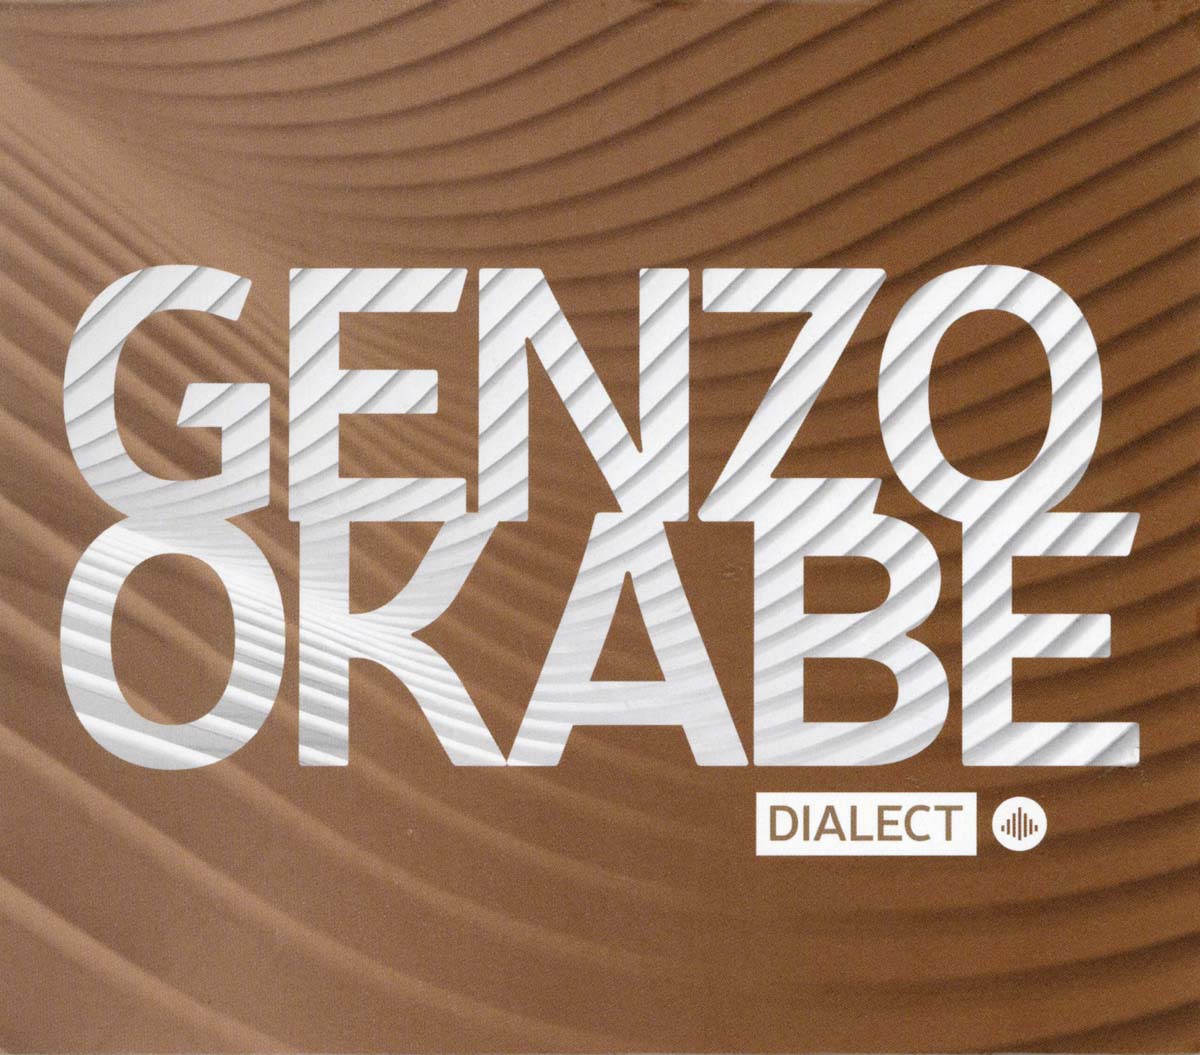 Genzo Okabe - Dialect